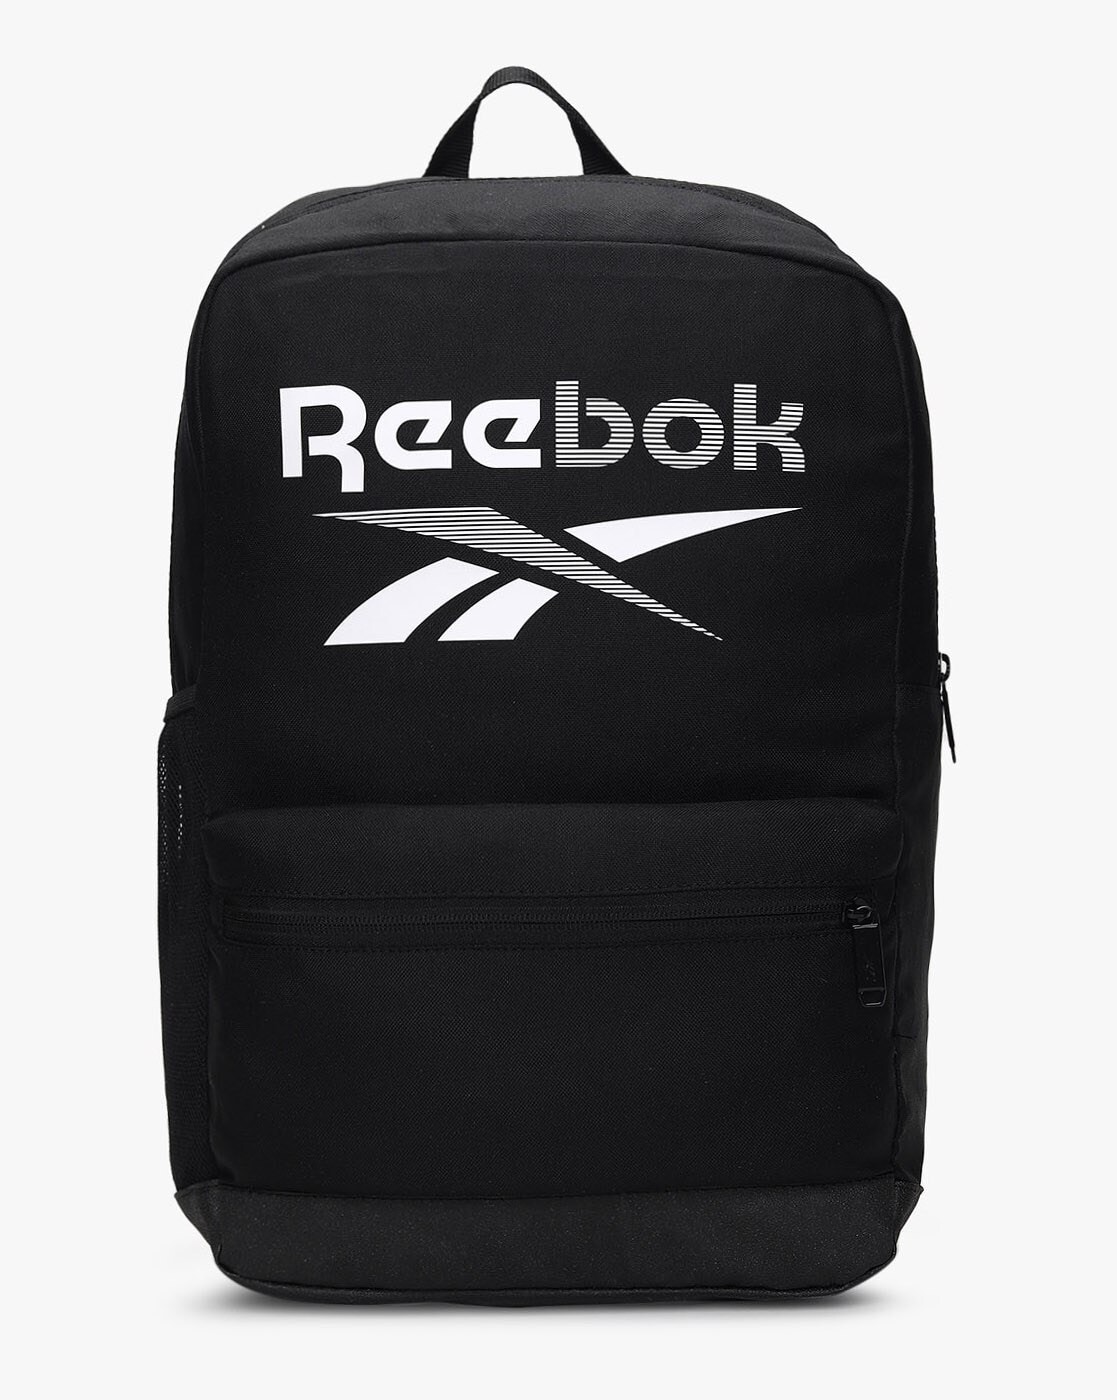 Vintage Reebok Bag | Urban Outfitters New Zealand - Clothing, Music, Home &  Accessories